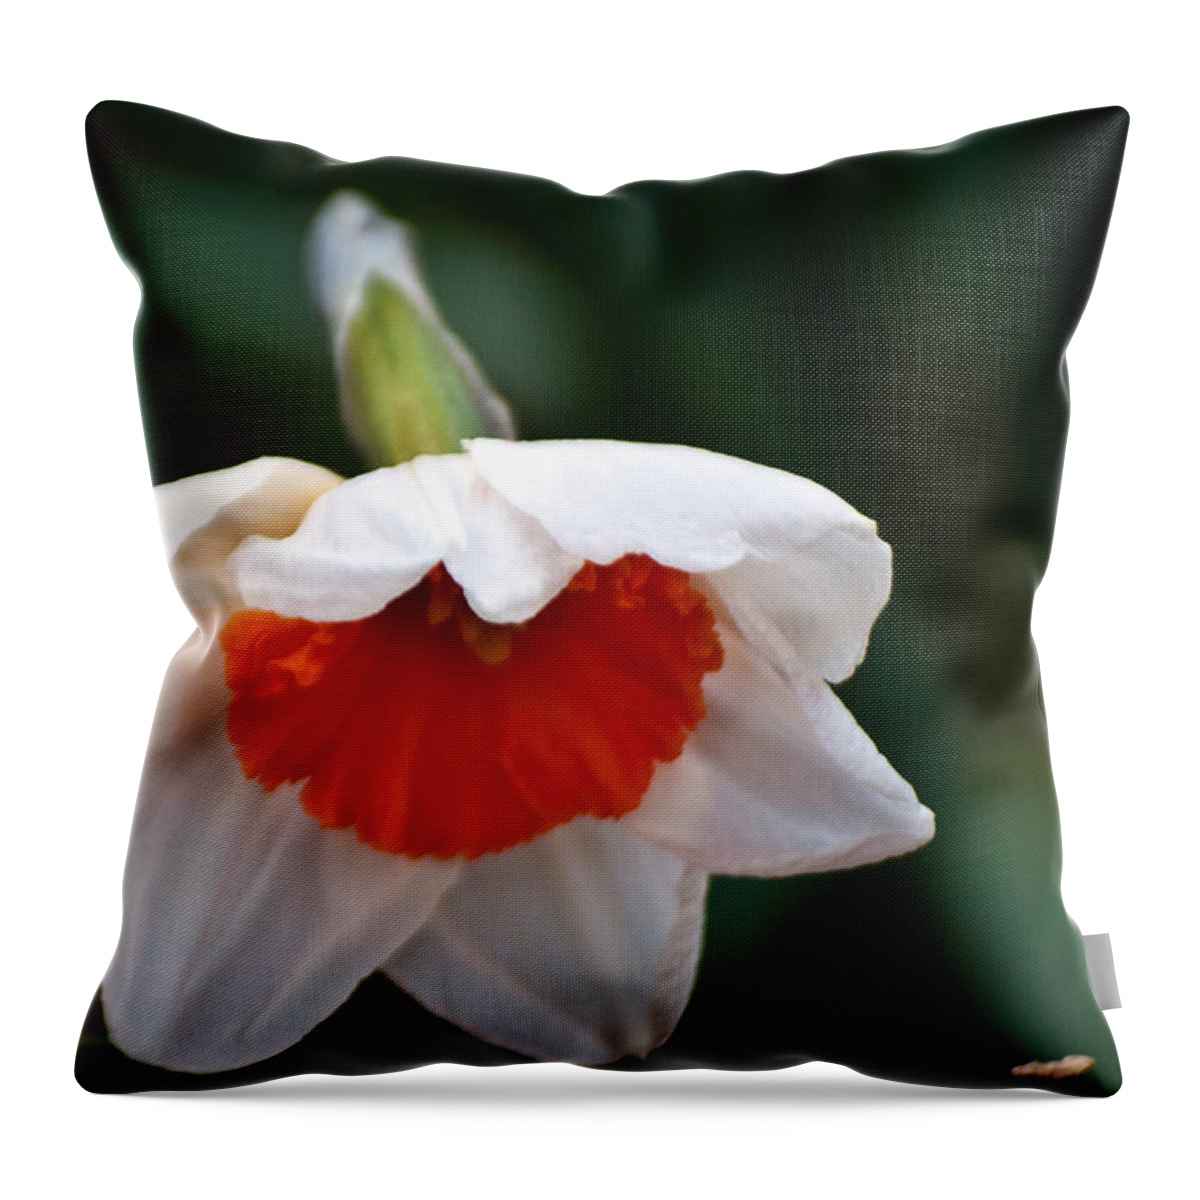 Passover Throw Pillow featuring the photograph White and Orange Daffodil by Tikvah's Hope